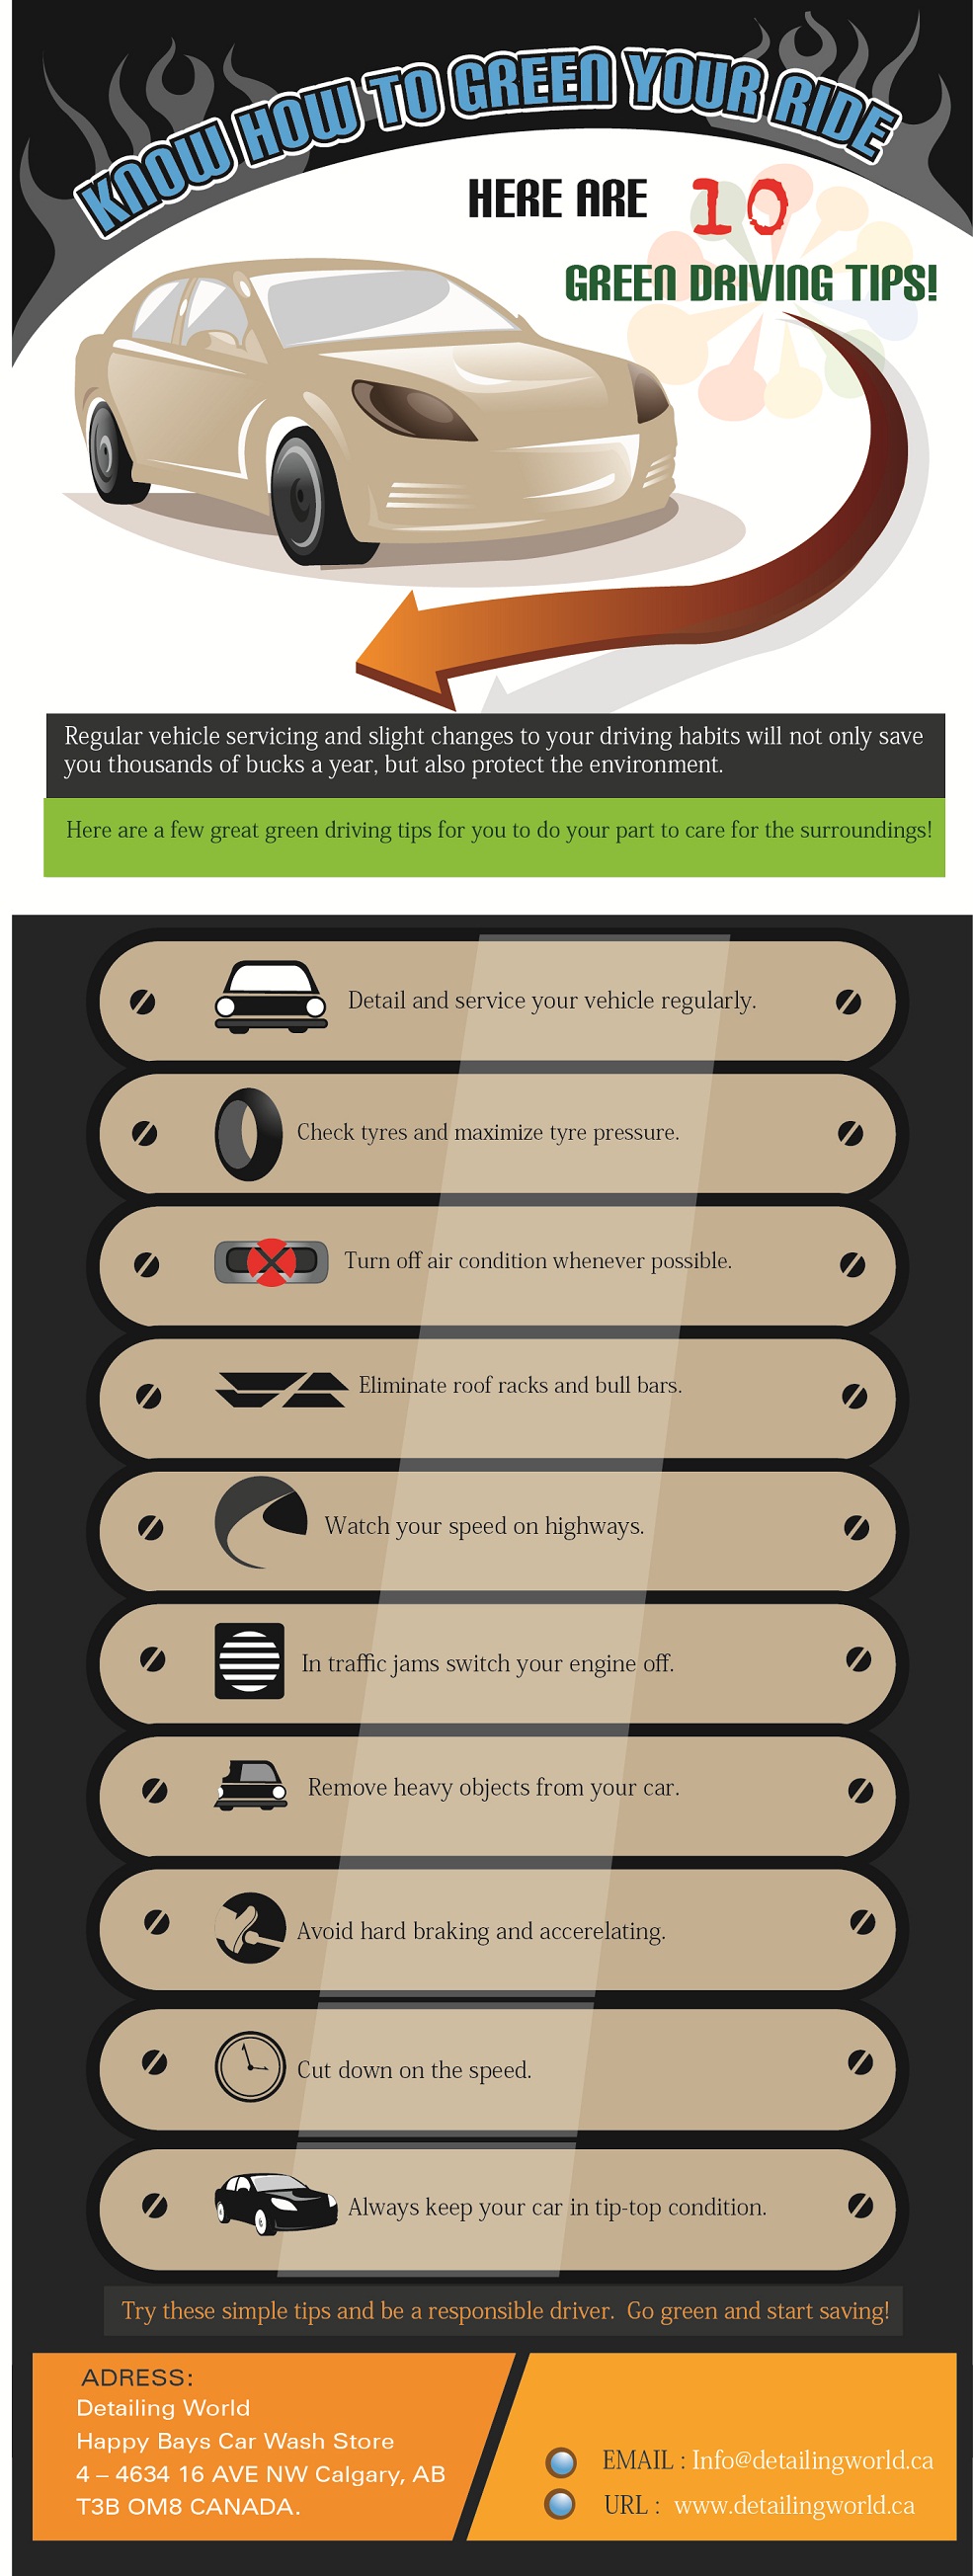 Know how to green your ride here are 10 green driving tips! Visual.ly